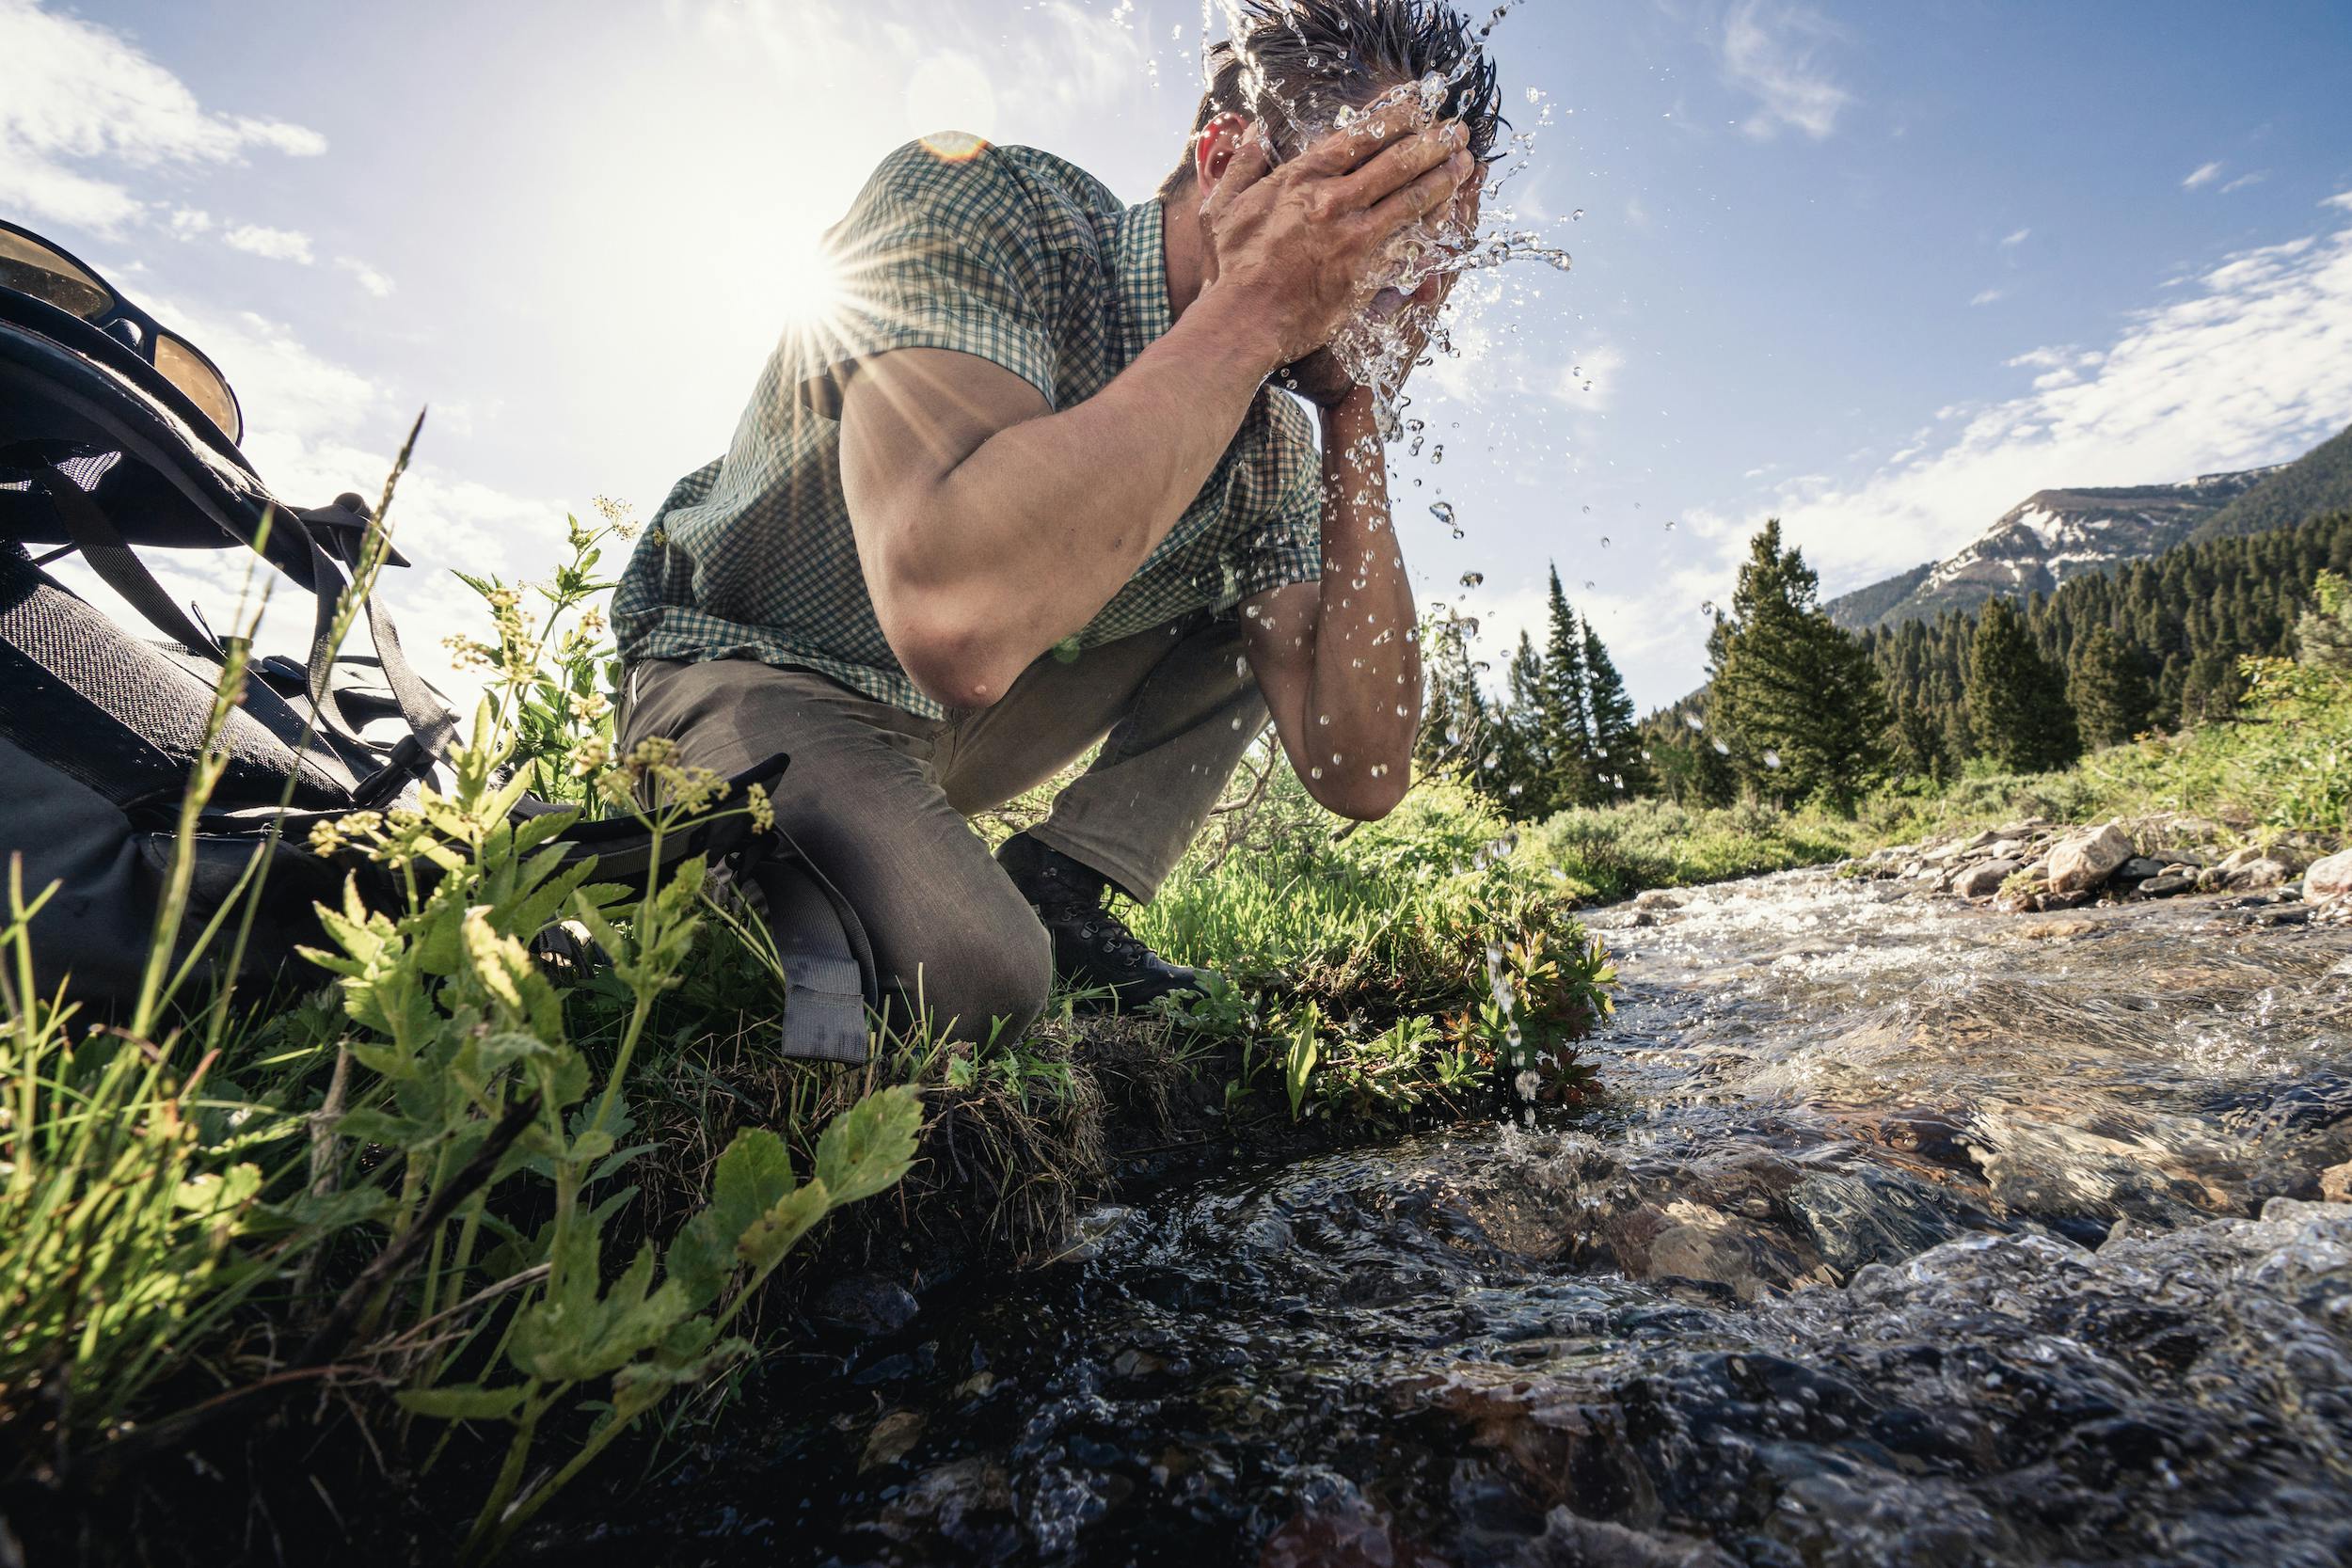 Hiker washing their face in a beautiful mountain creek while on a backpacking trip.